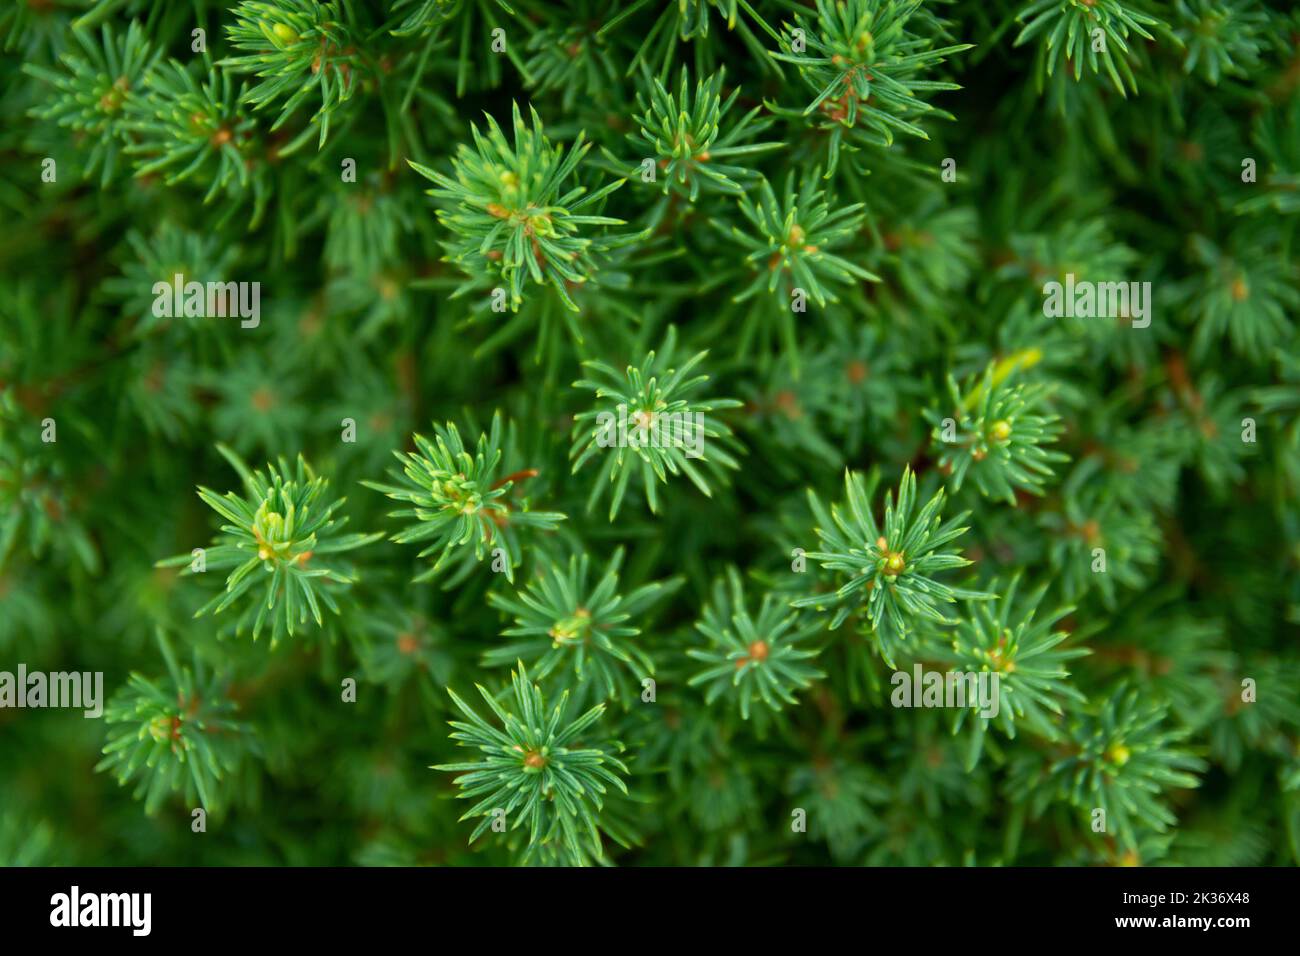 Beautiful coniferous green tree close-up, christmas festive background, top view Stock Photo